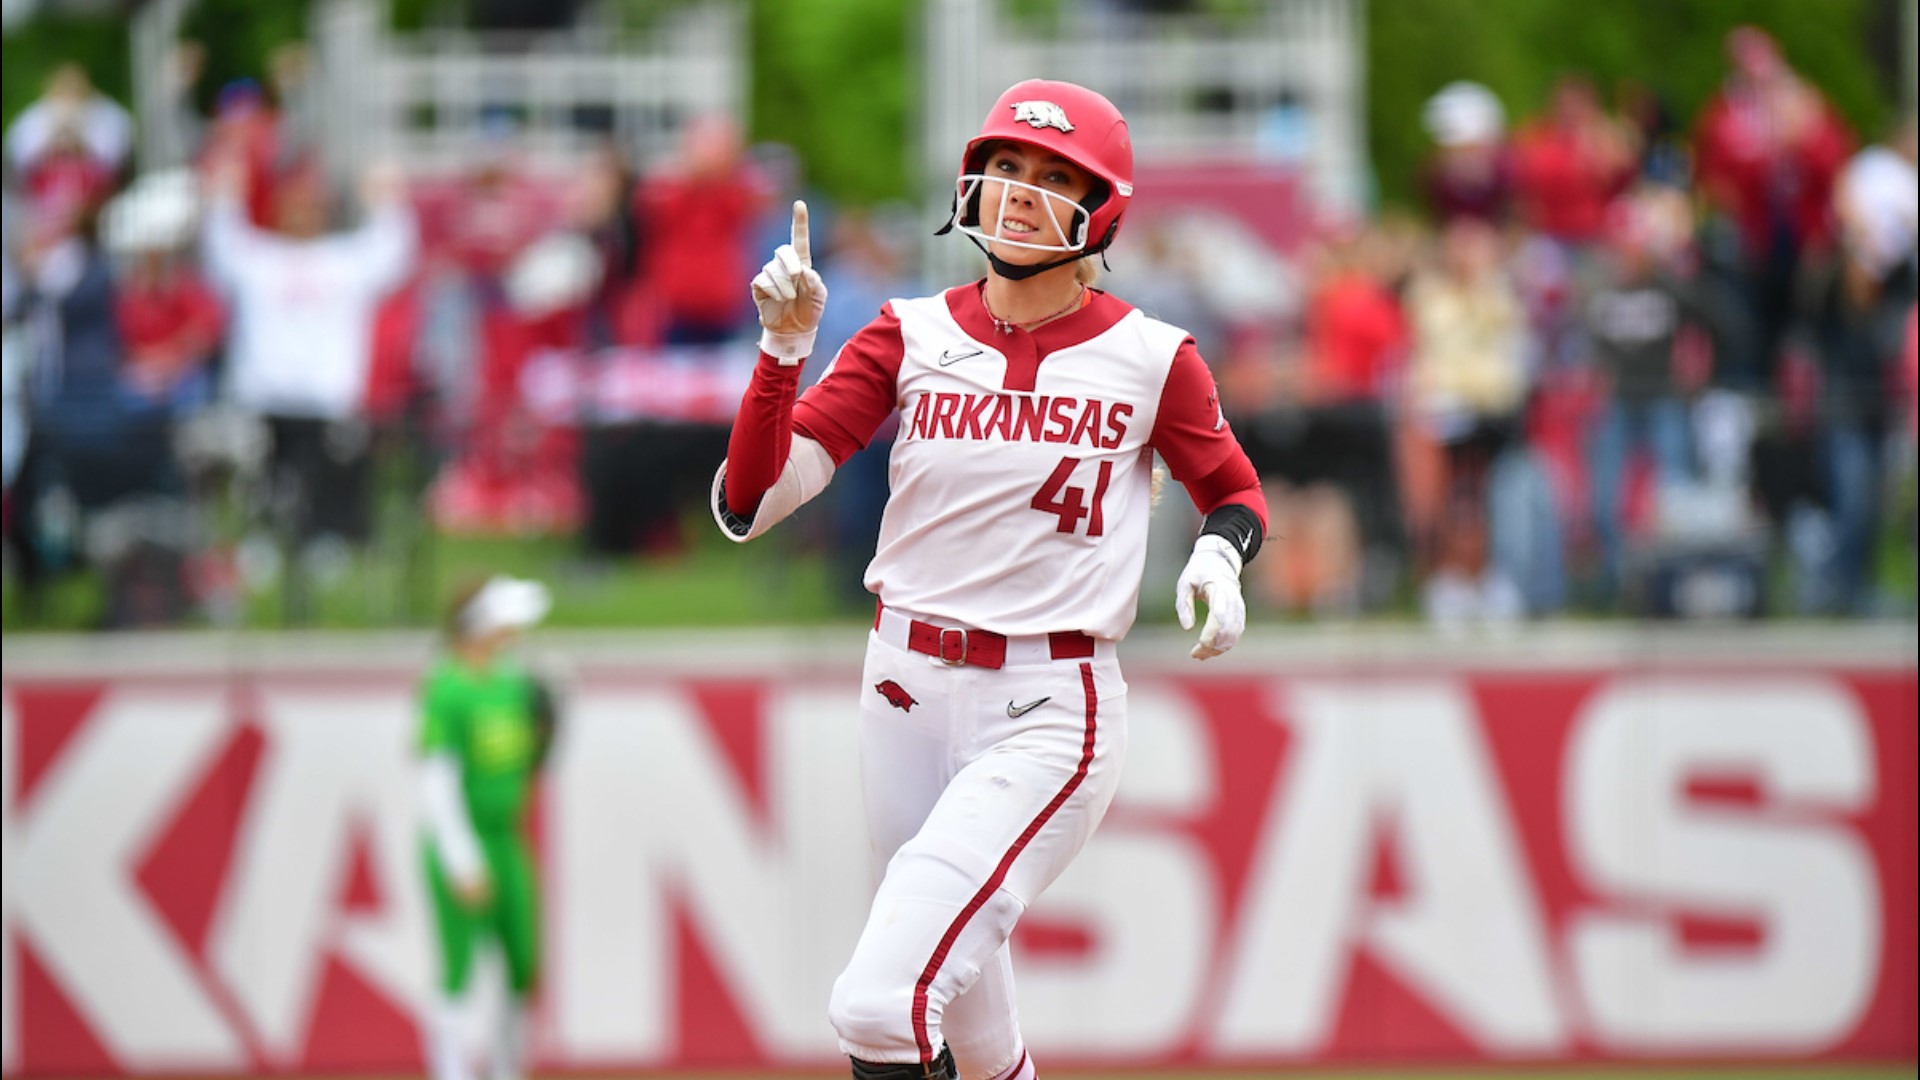 The former Razorback softball star is back at Arkansas as an assistant coach, an opportunity she said was too good to pass up.